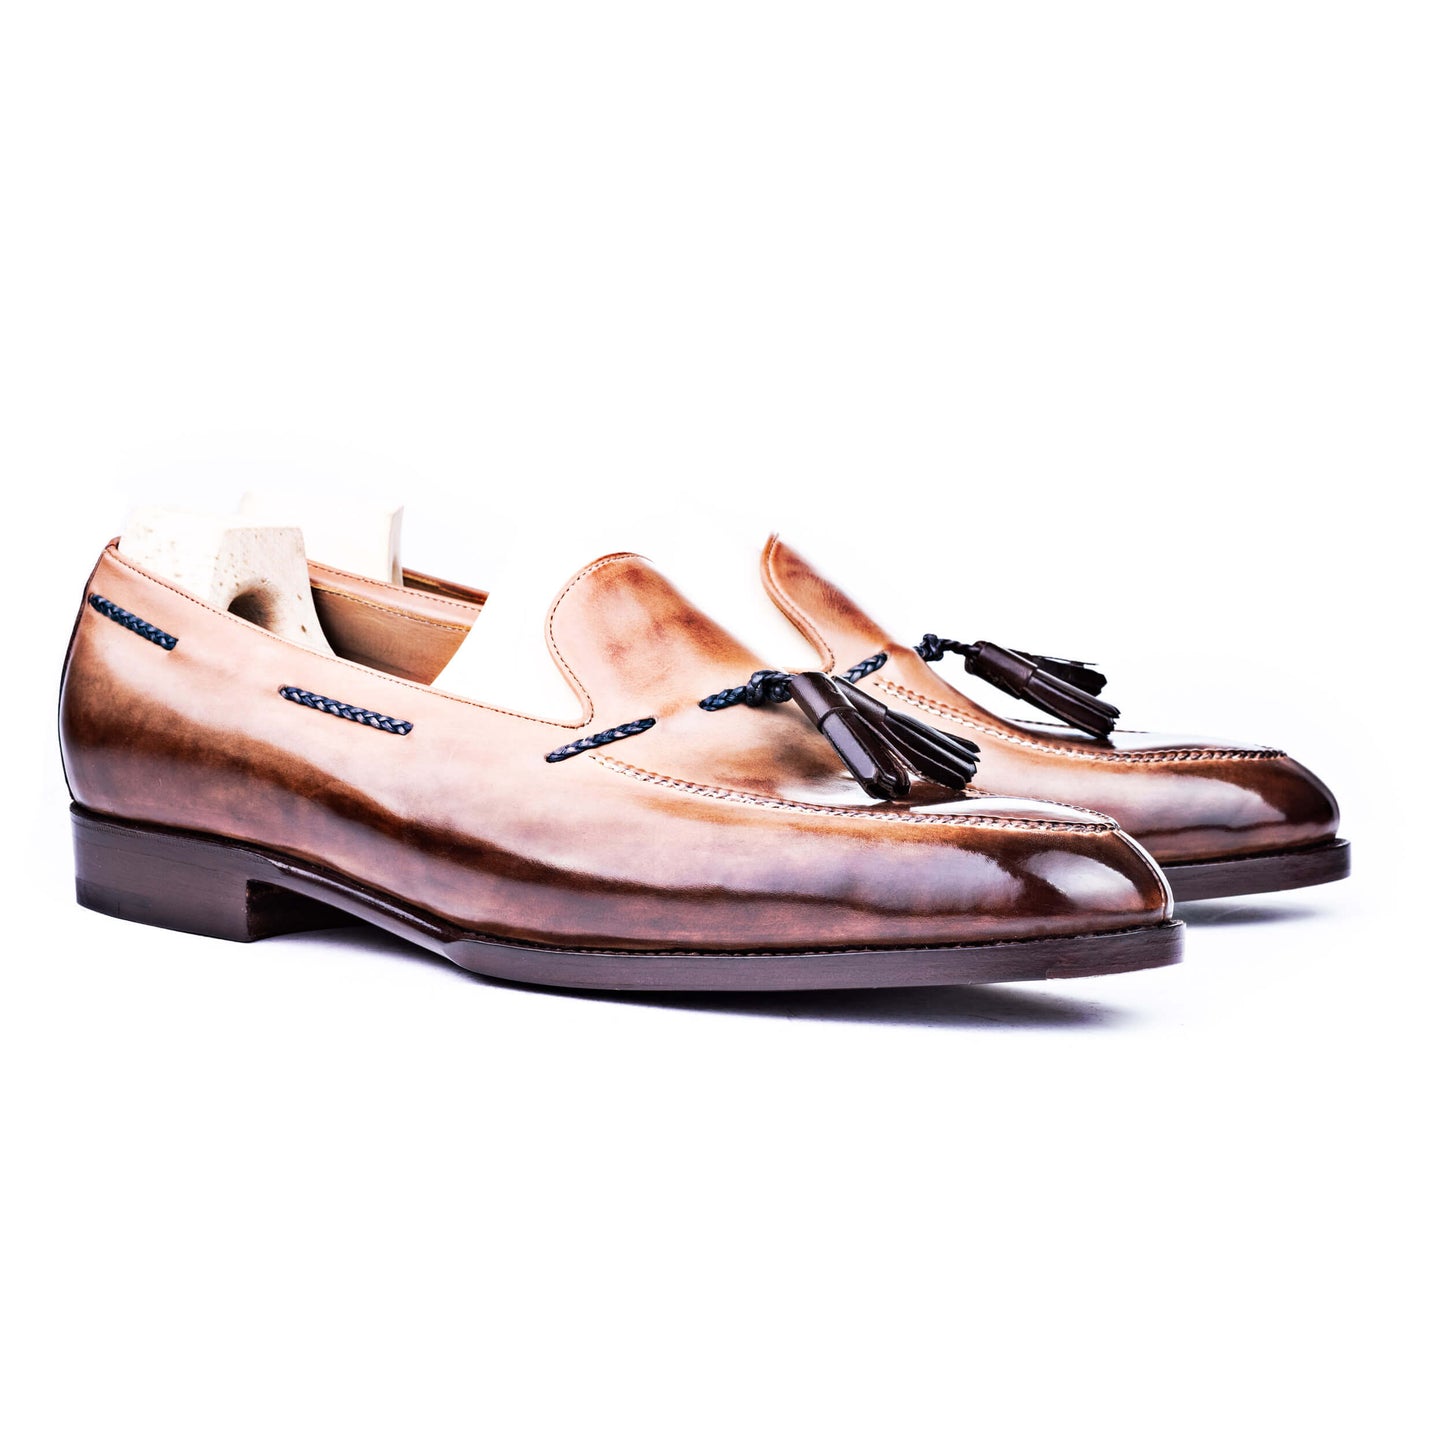 Loafer with hand stitched apron and tassels, patinized